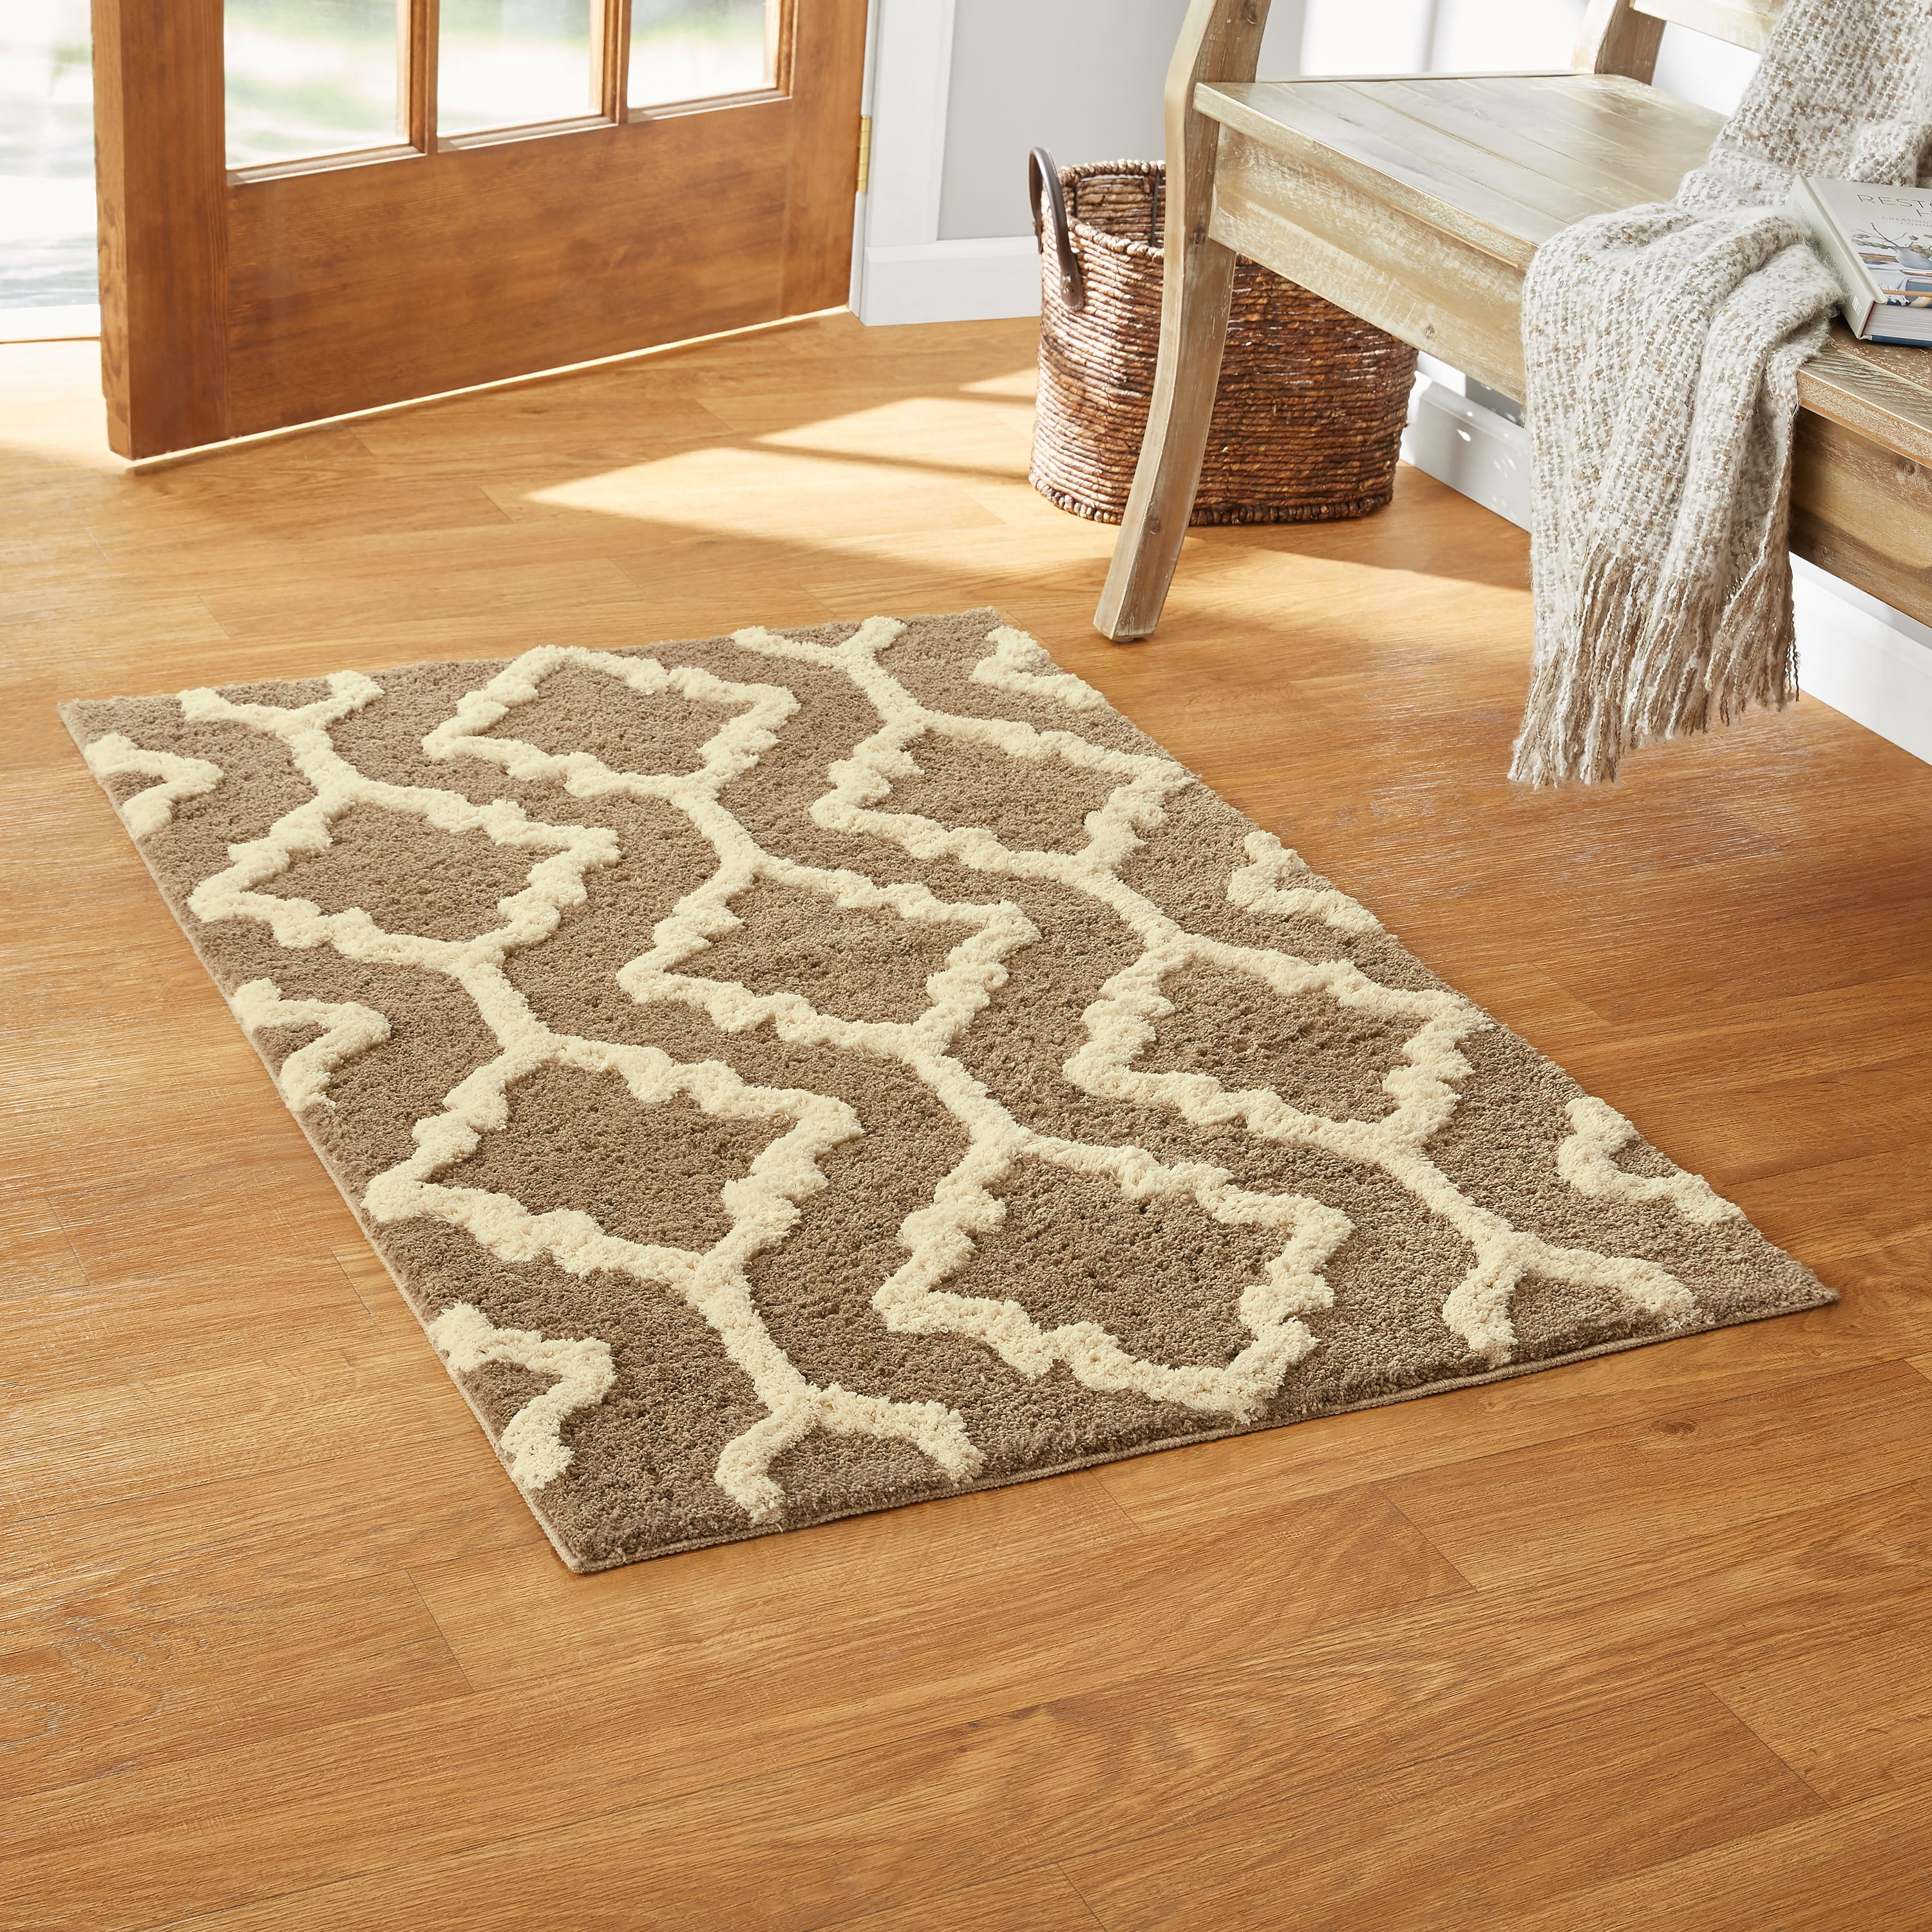 Taupe Geo Polyester Rug, Better Homes Gardens Geo Waves Area Rug Aqua